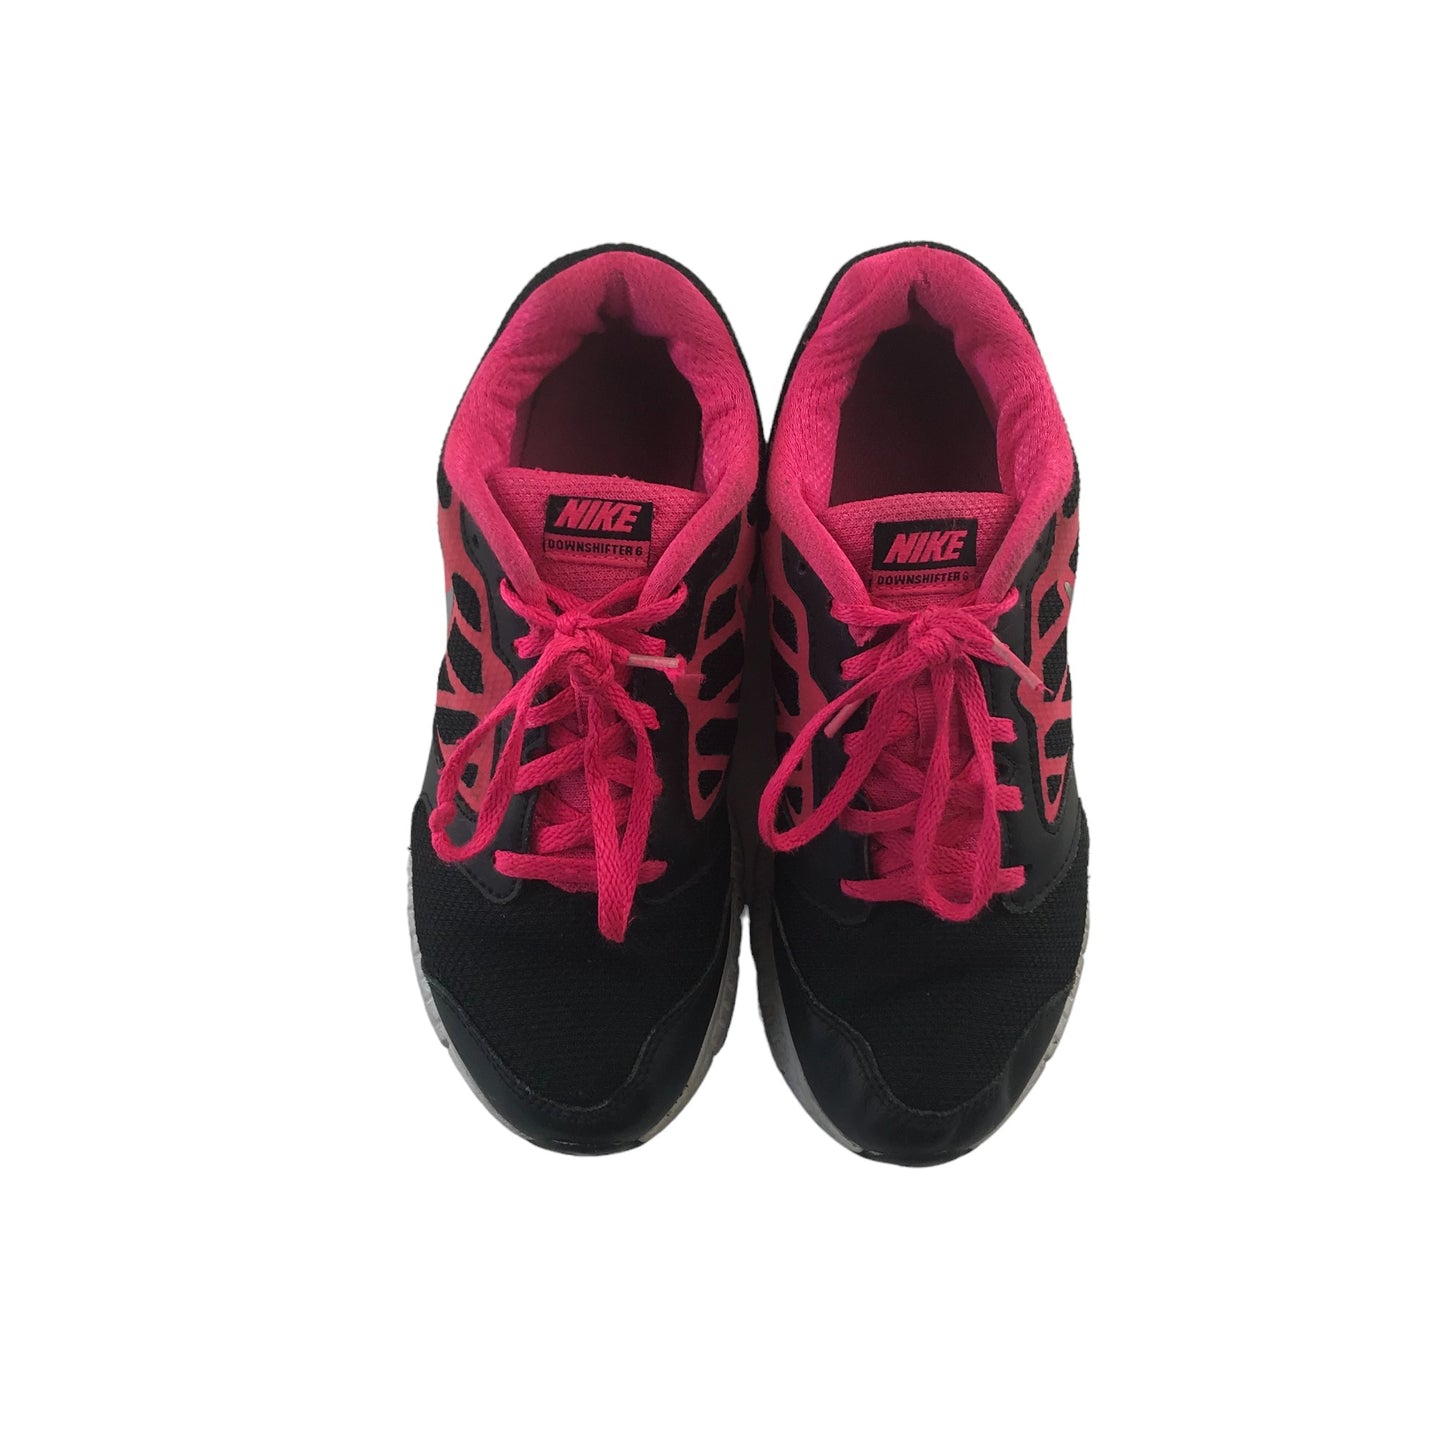 Nike Downshifter 6 Trainers Shoe Size 4 Black and Neon Pink Details